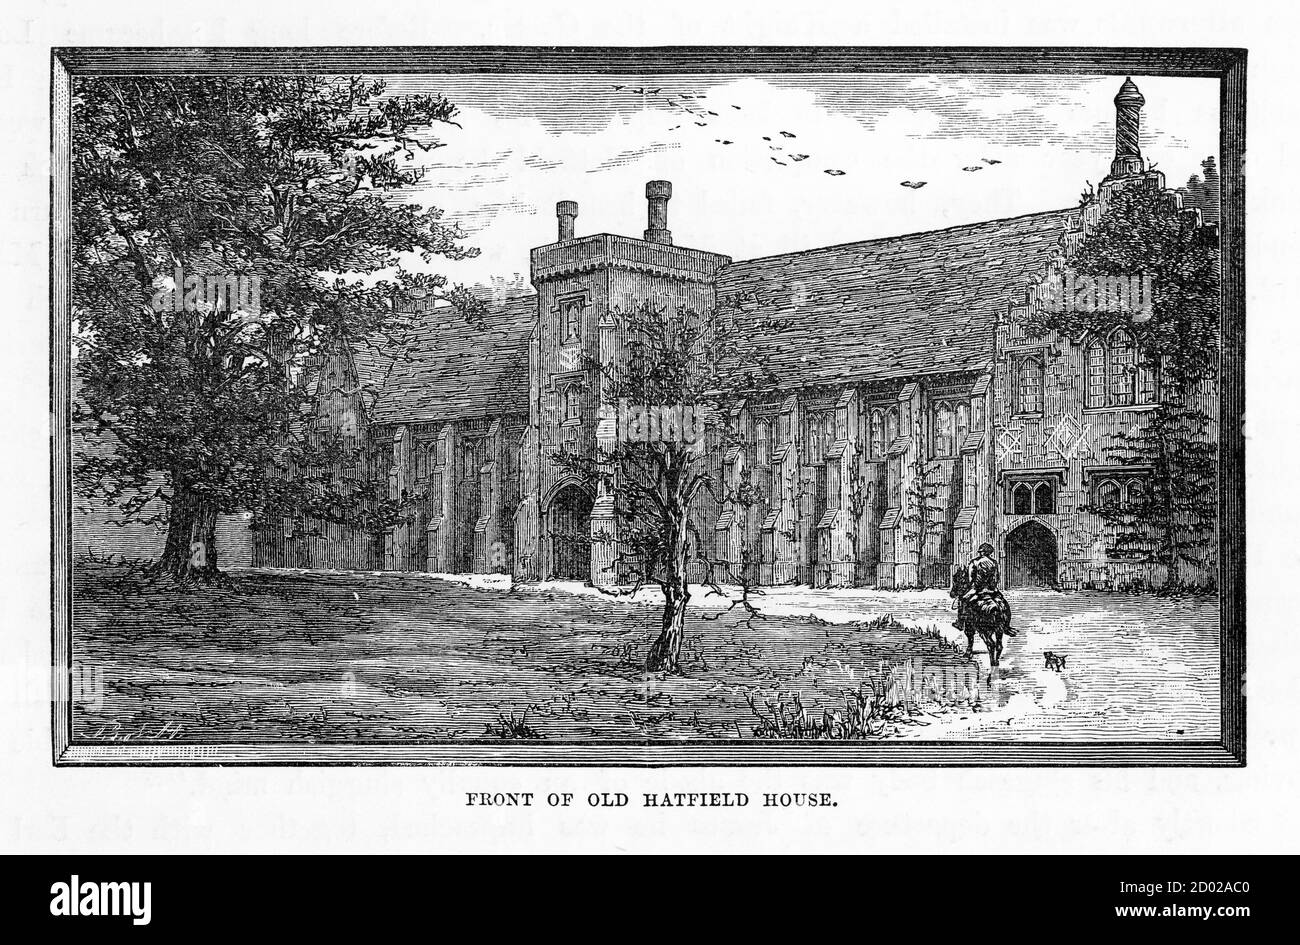 Hatfield, Front of Old Hatfield House, Hertfordshire, England Victorian Engraving, 1840 Stock Photo